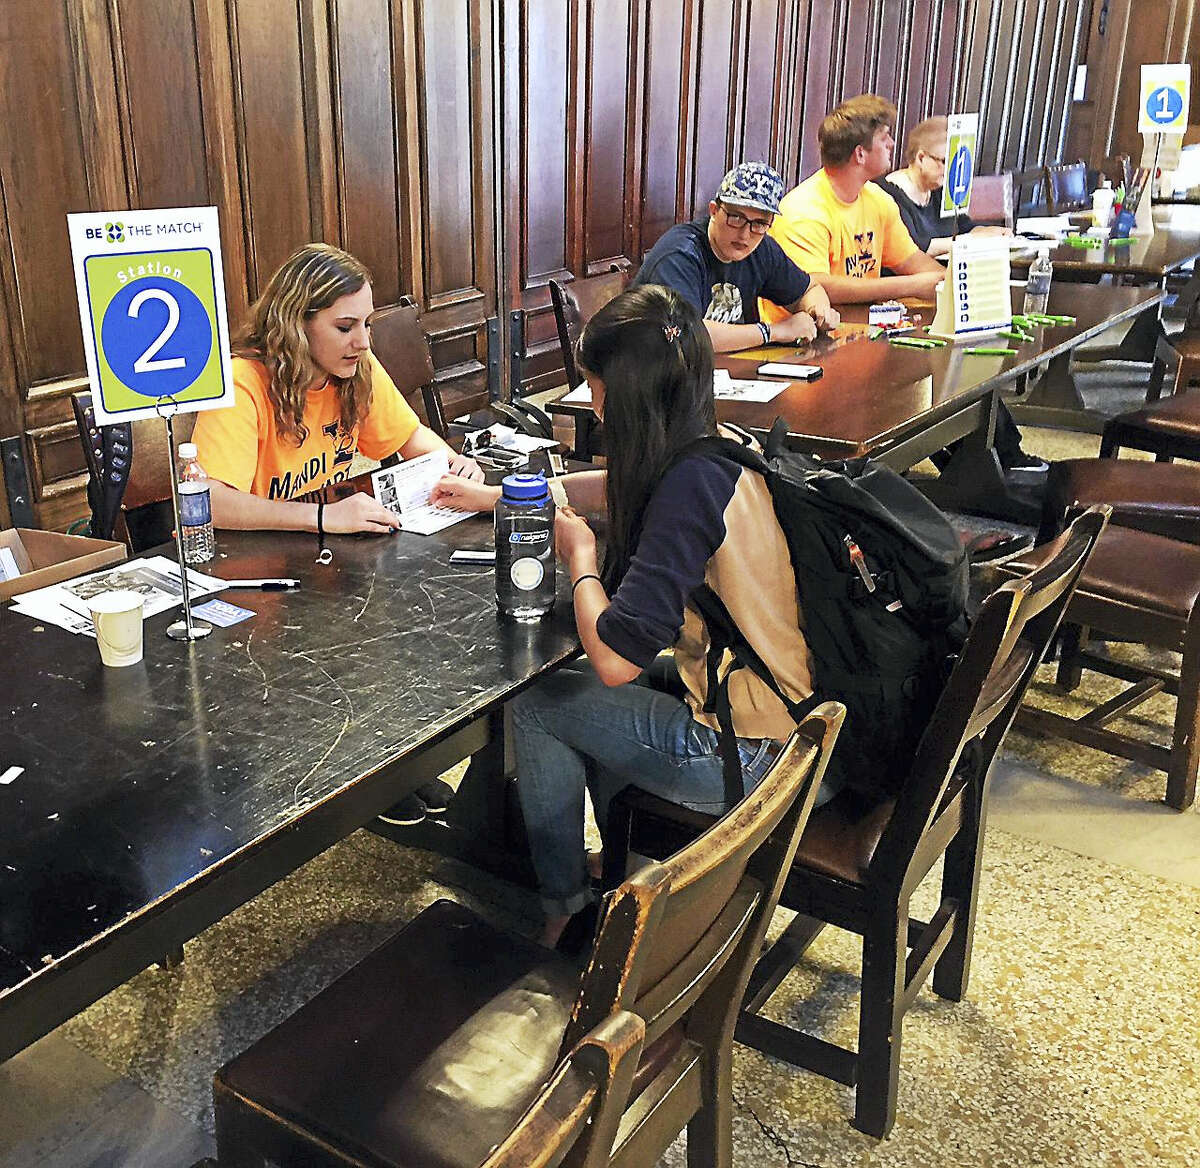 Volunteers sign up at the annual Mandi Schwartz Marrow Donor Registration Drive at Yale.